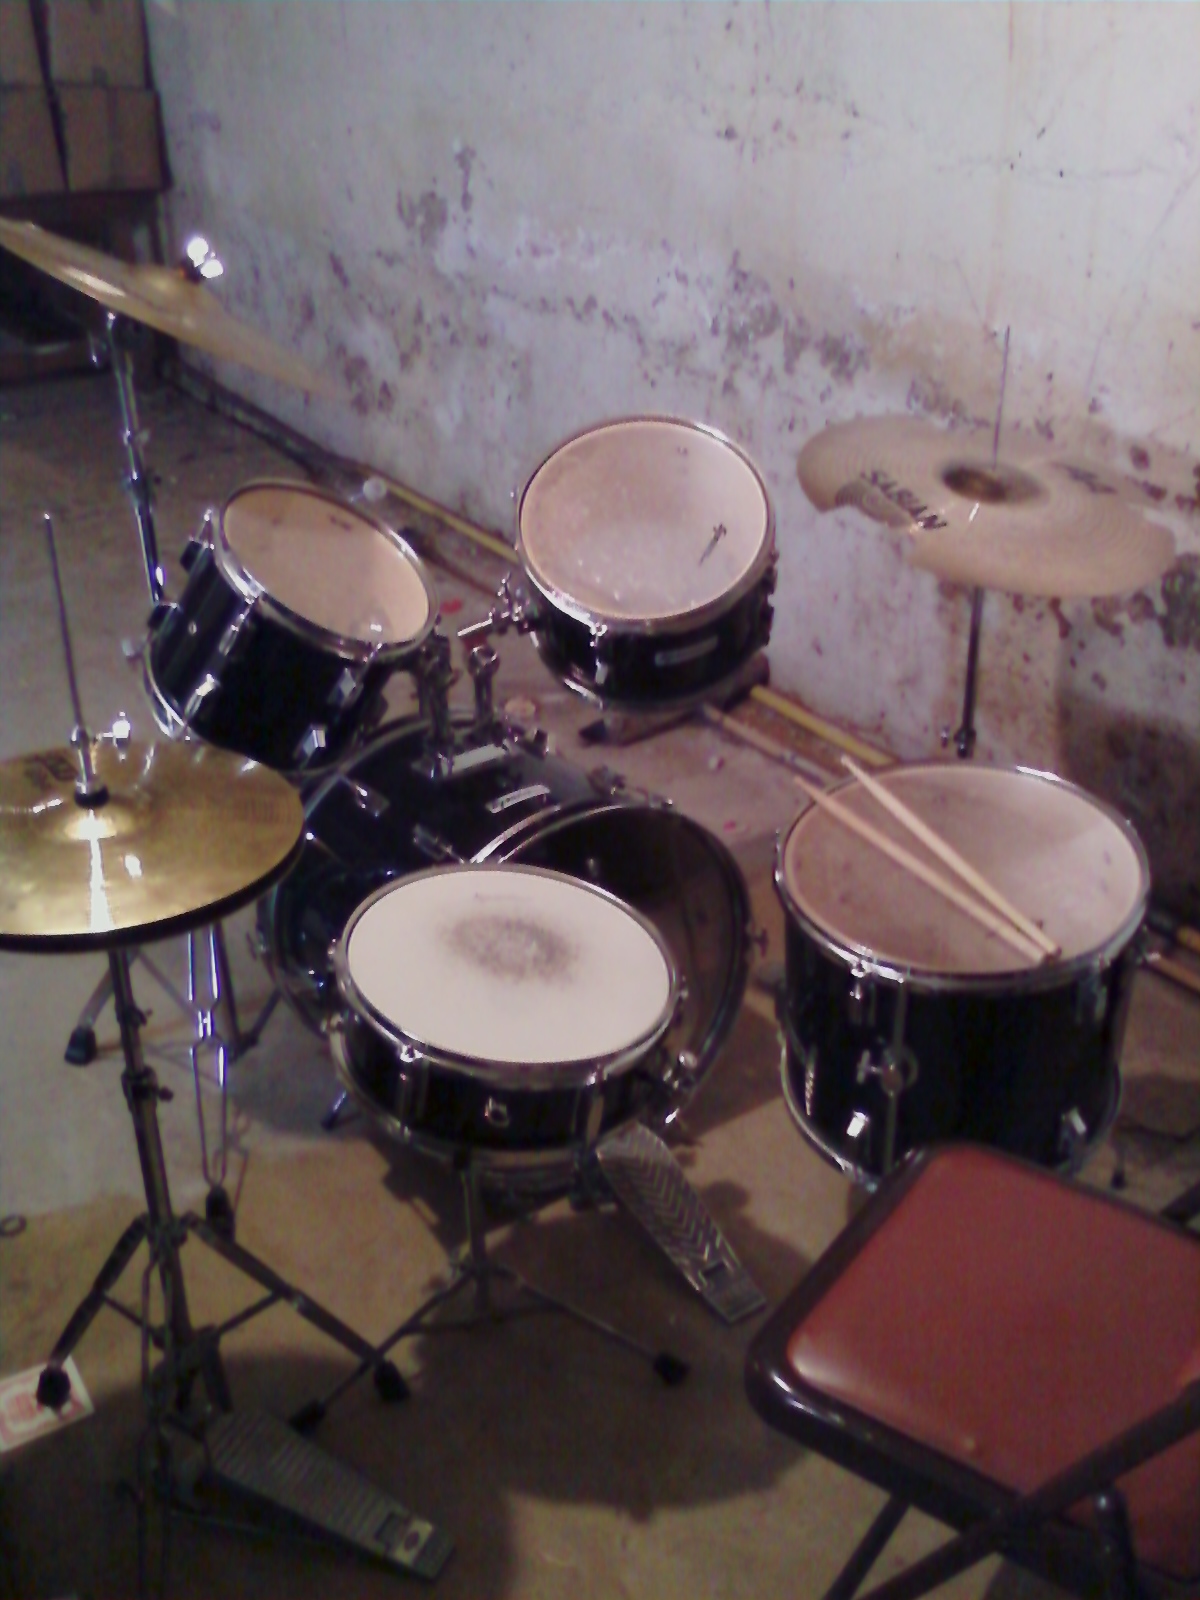 Kids drumset from my practice space/torture chamber down the street